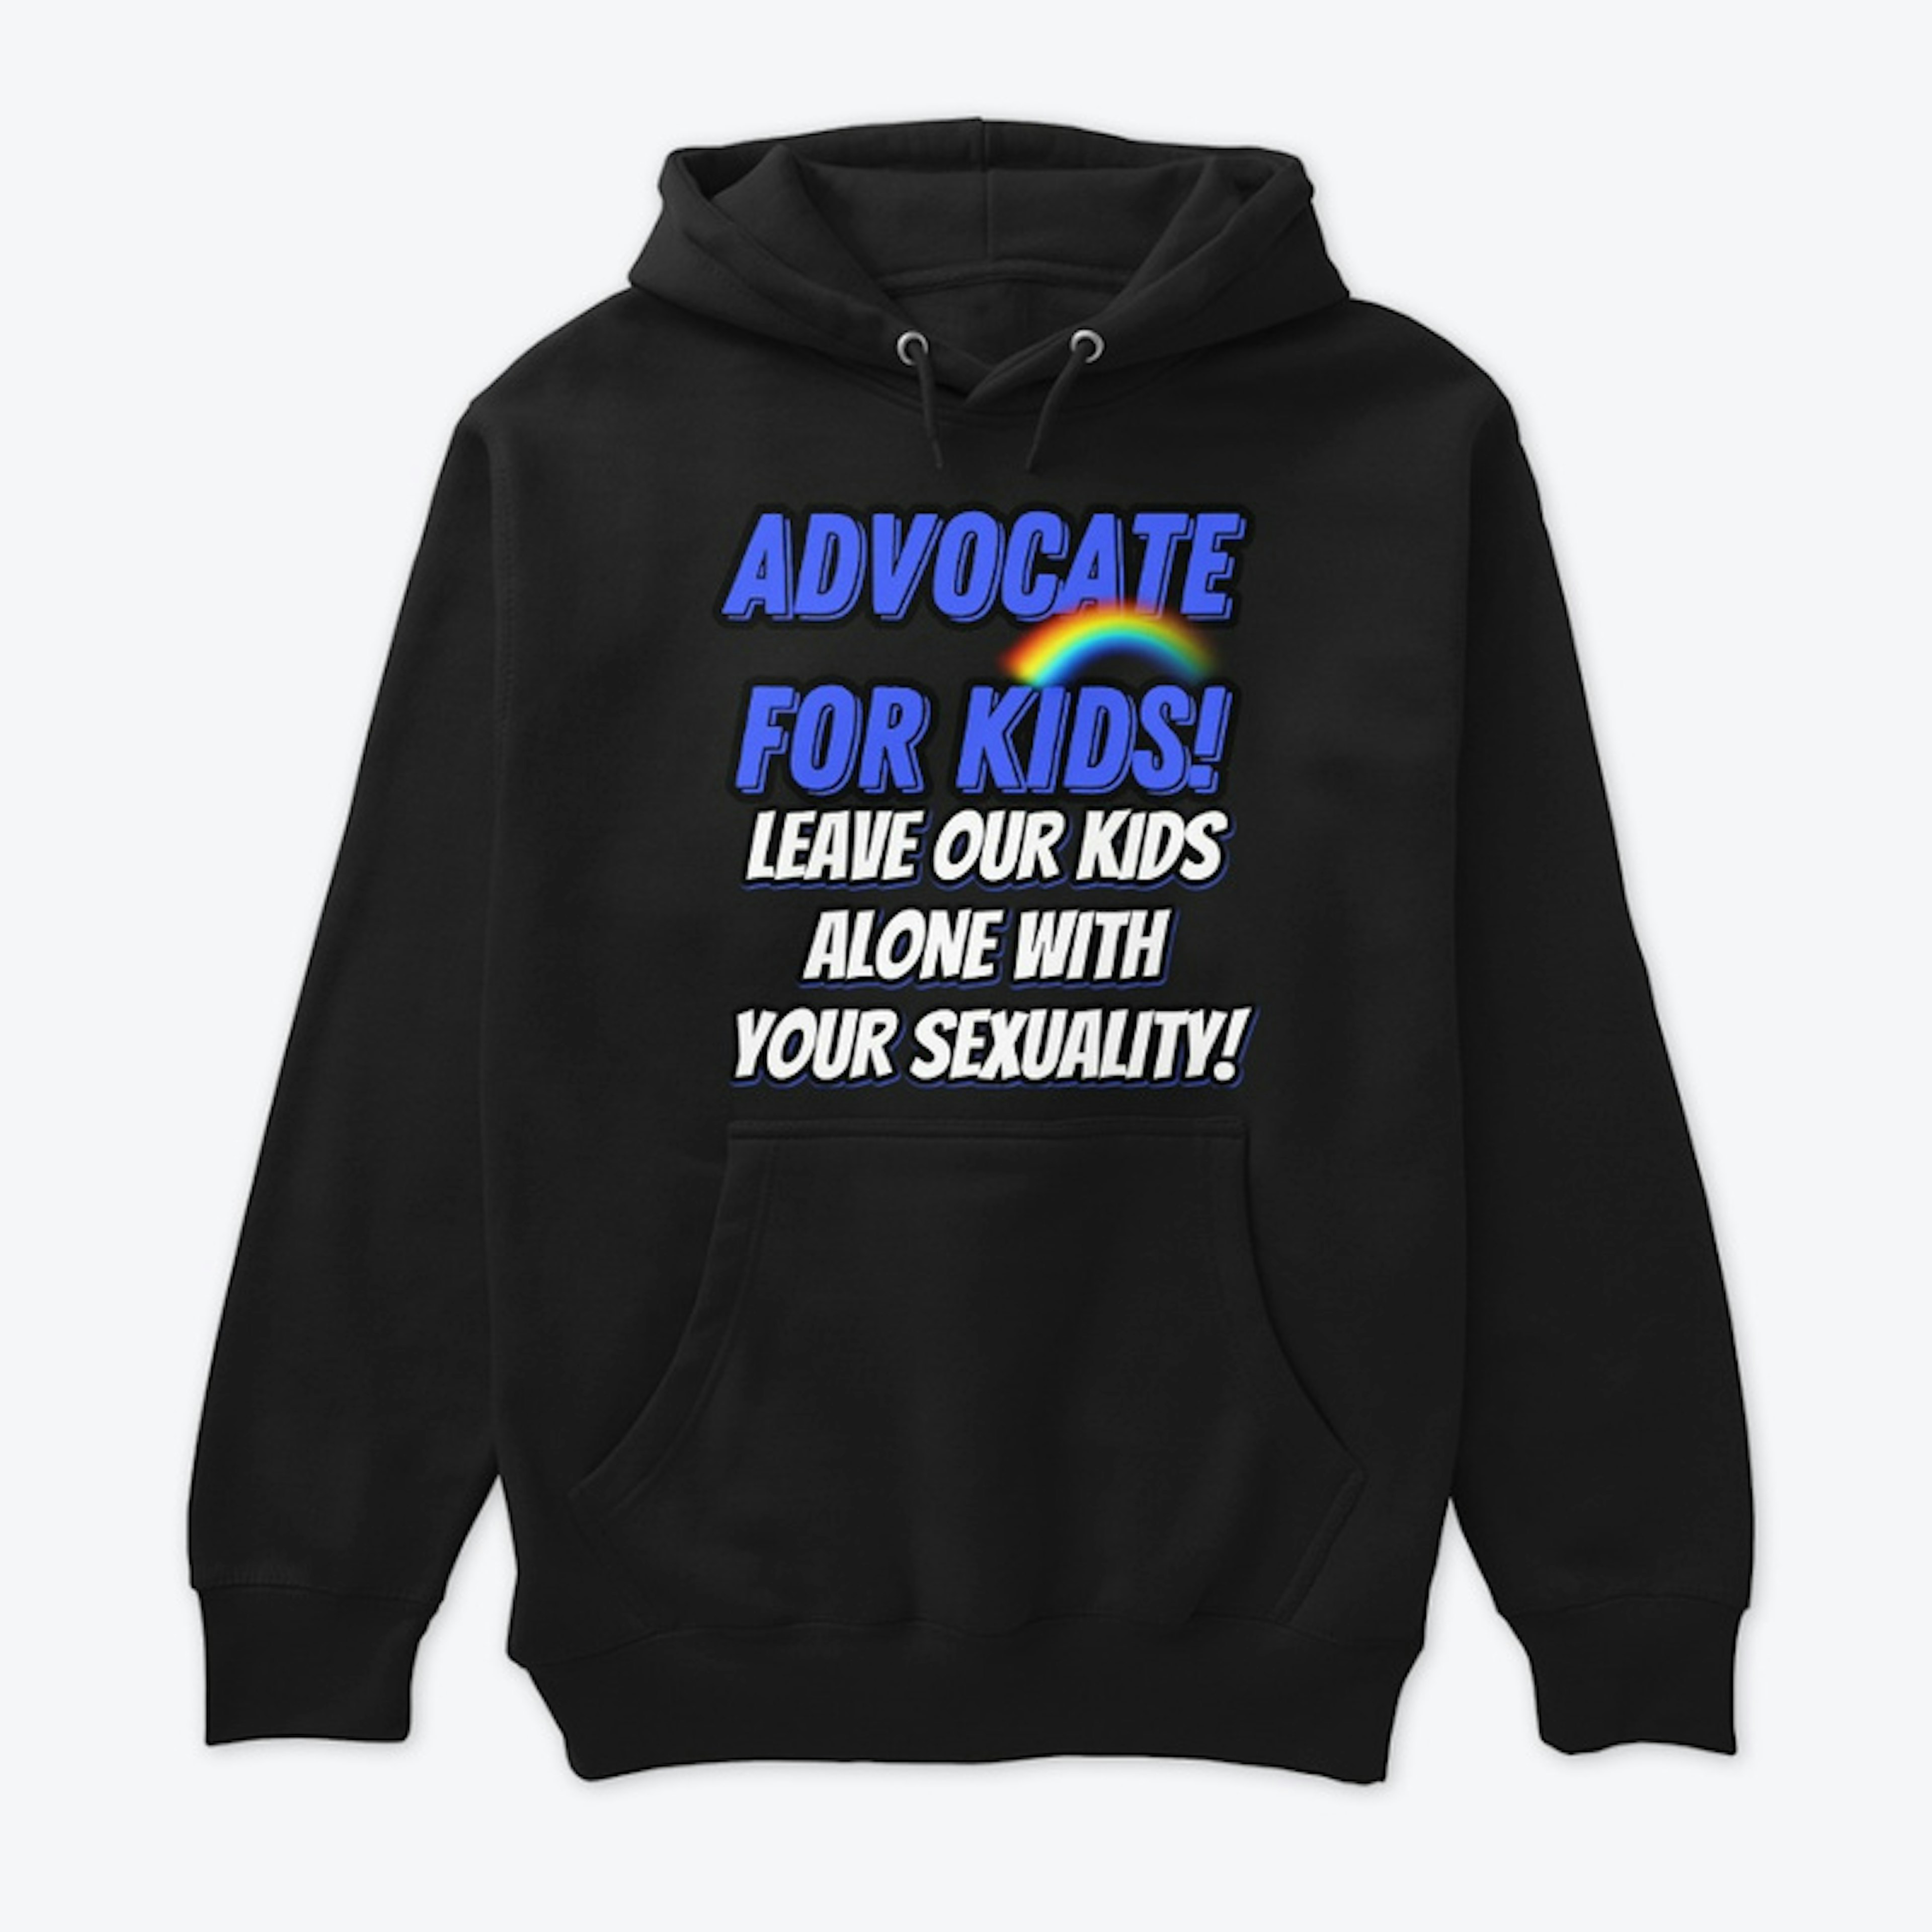 ADVOCATE FOR KIDS!!